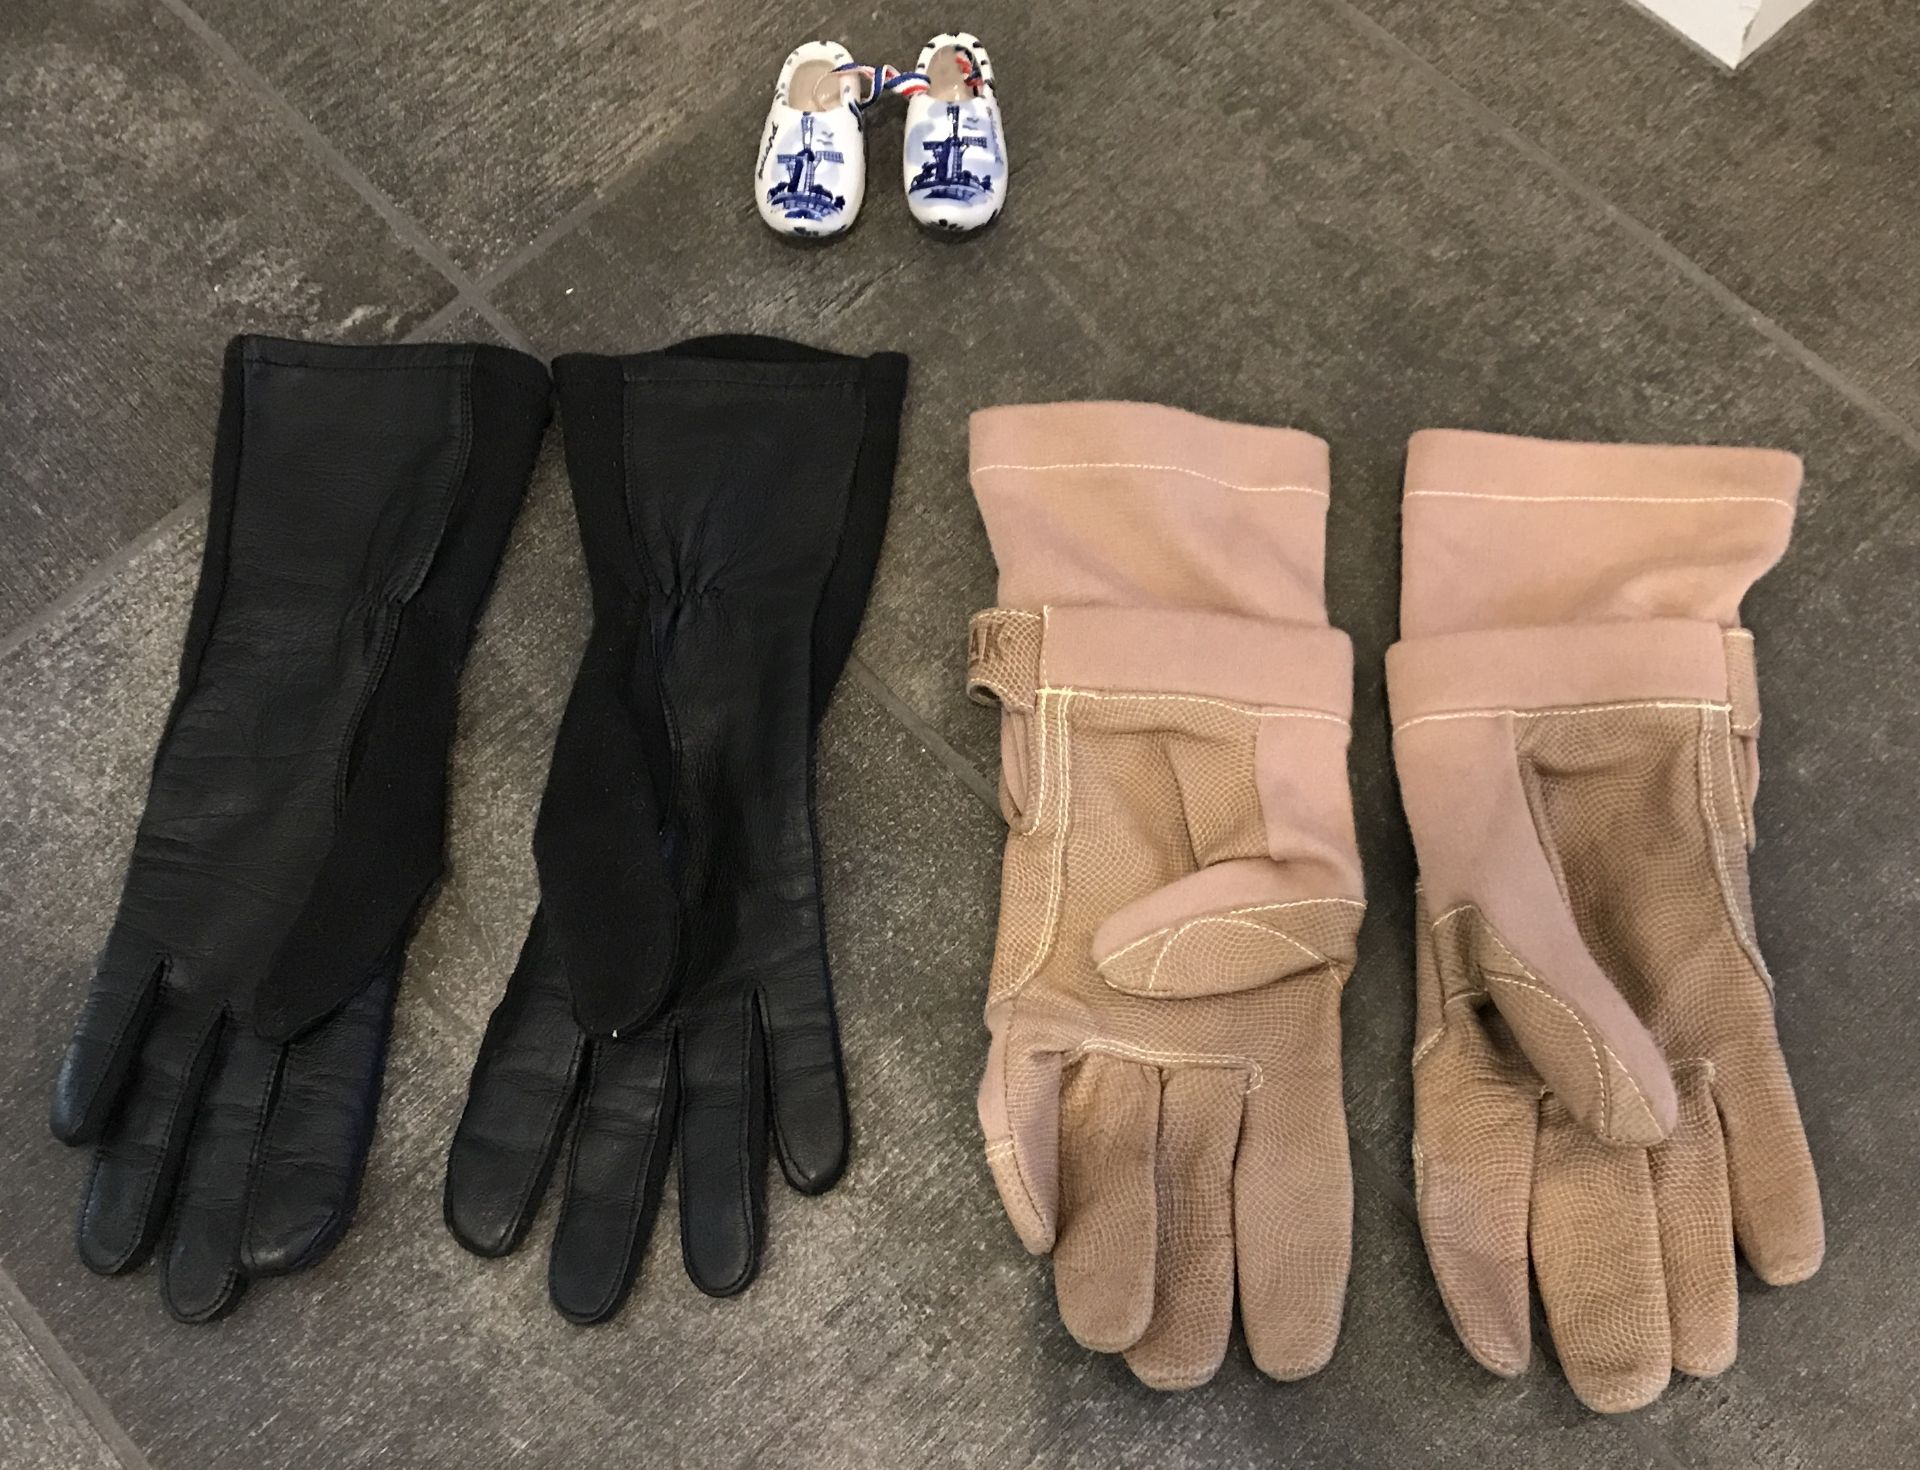 LOT OF BLACK LEATHER MILITARY GLOVES PAIR OF TAN LEATHER MILITARY GLOVES AND PAIR OF SOUVENIR SHOES - Image 3 of 3